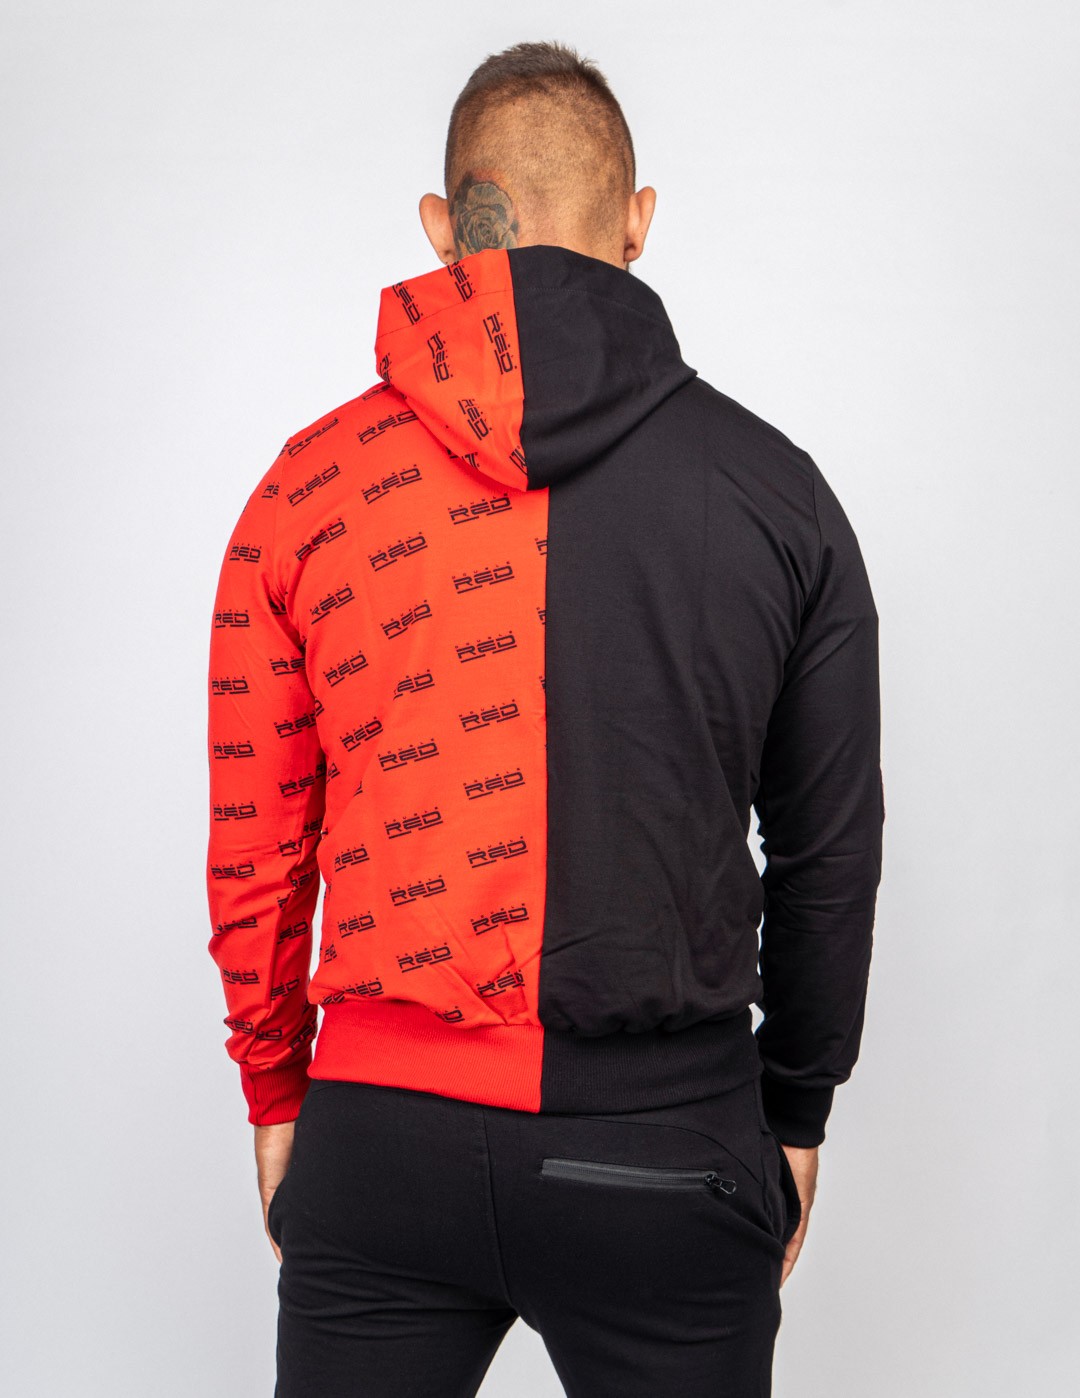 Hoodie DOUBLE FACE Black/Red